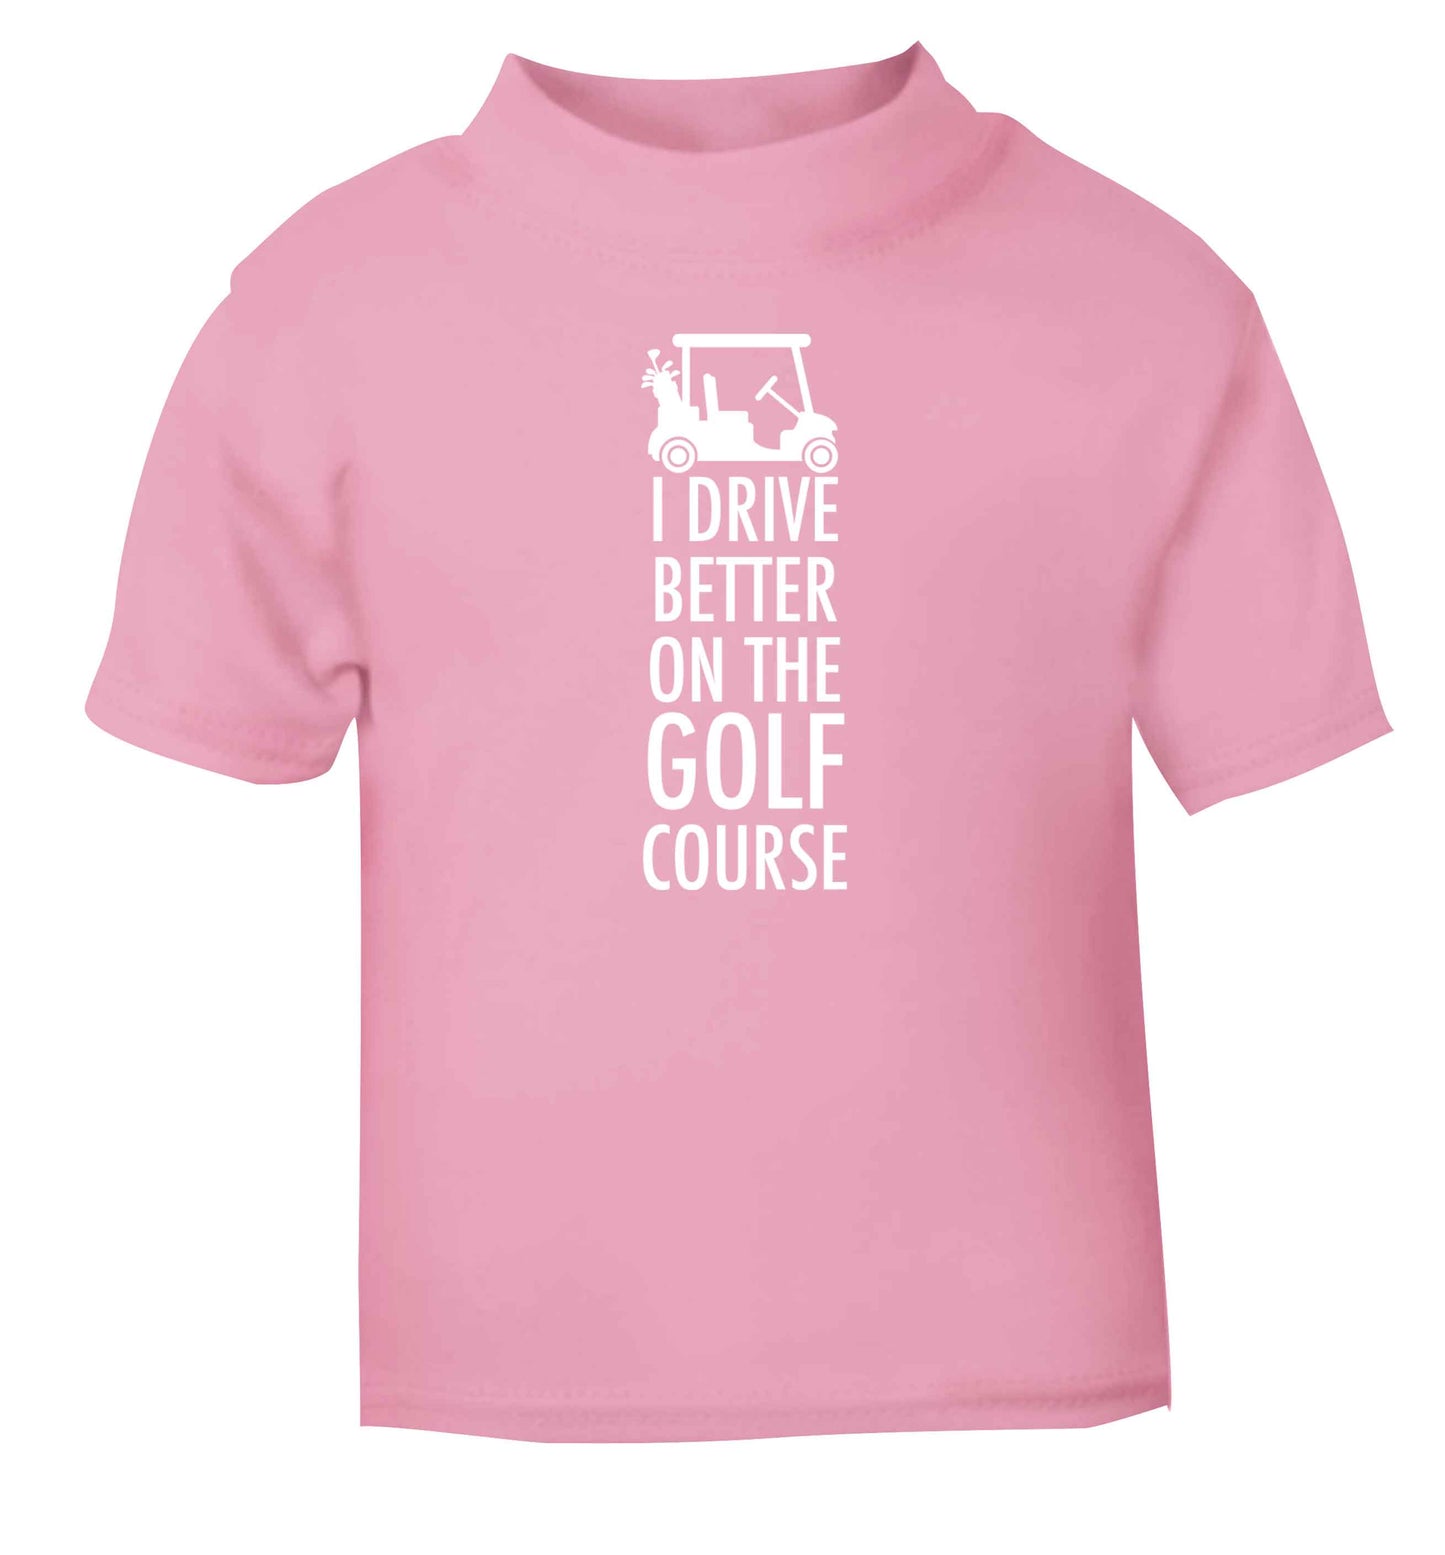 I drive better on the golf course light pink Baby Toddler Tshirt 2 Years